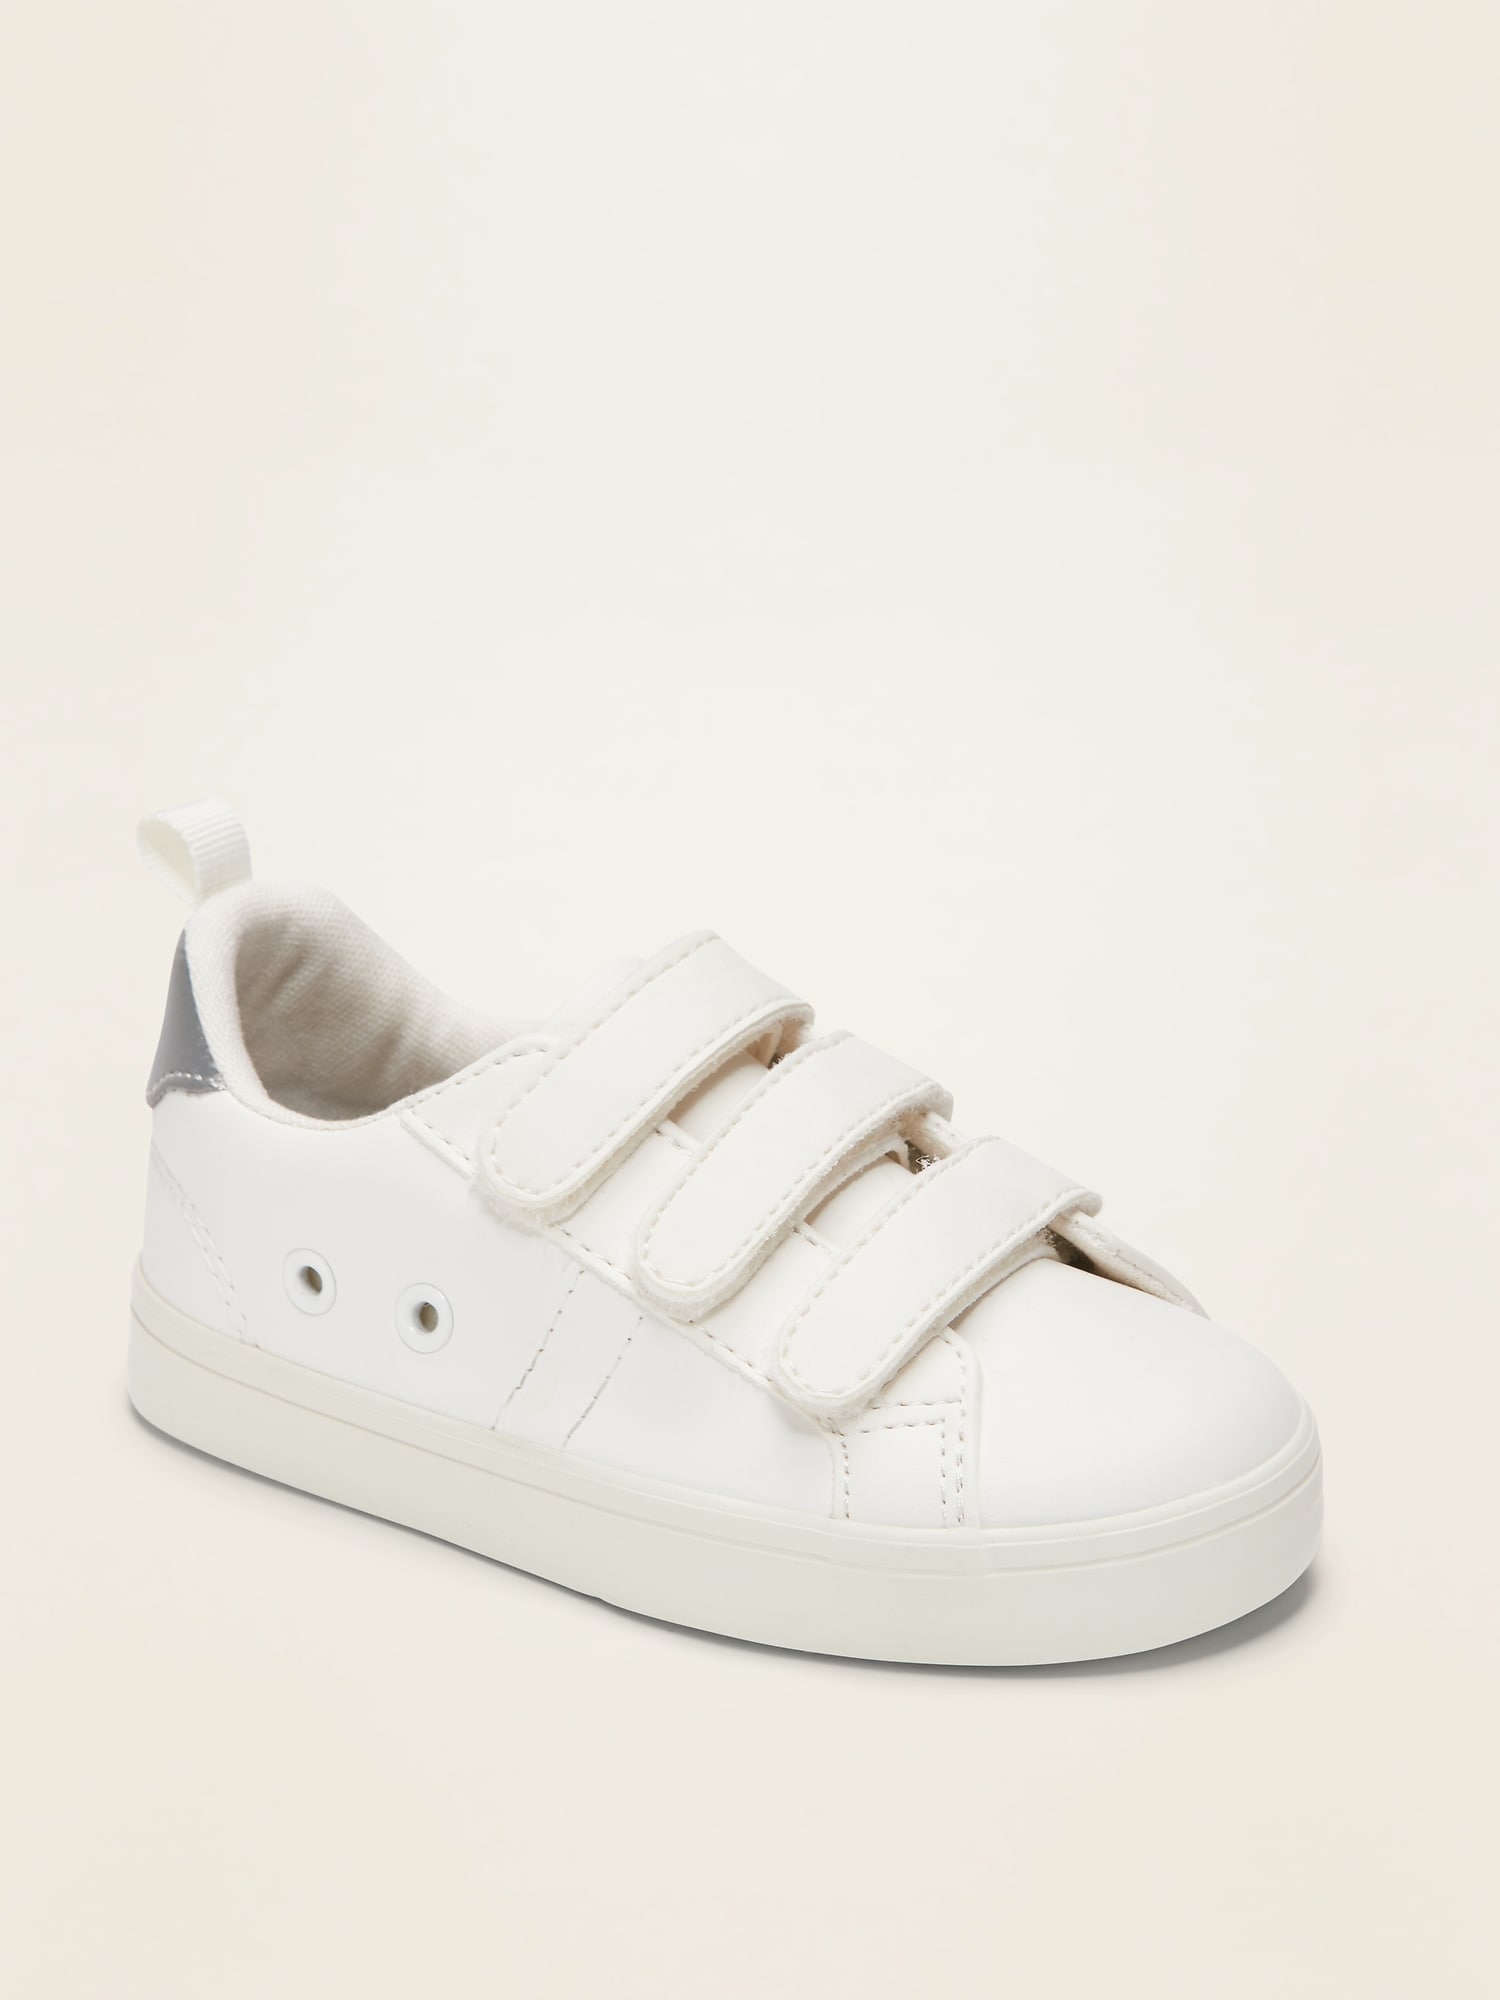 baby white sneakers